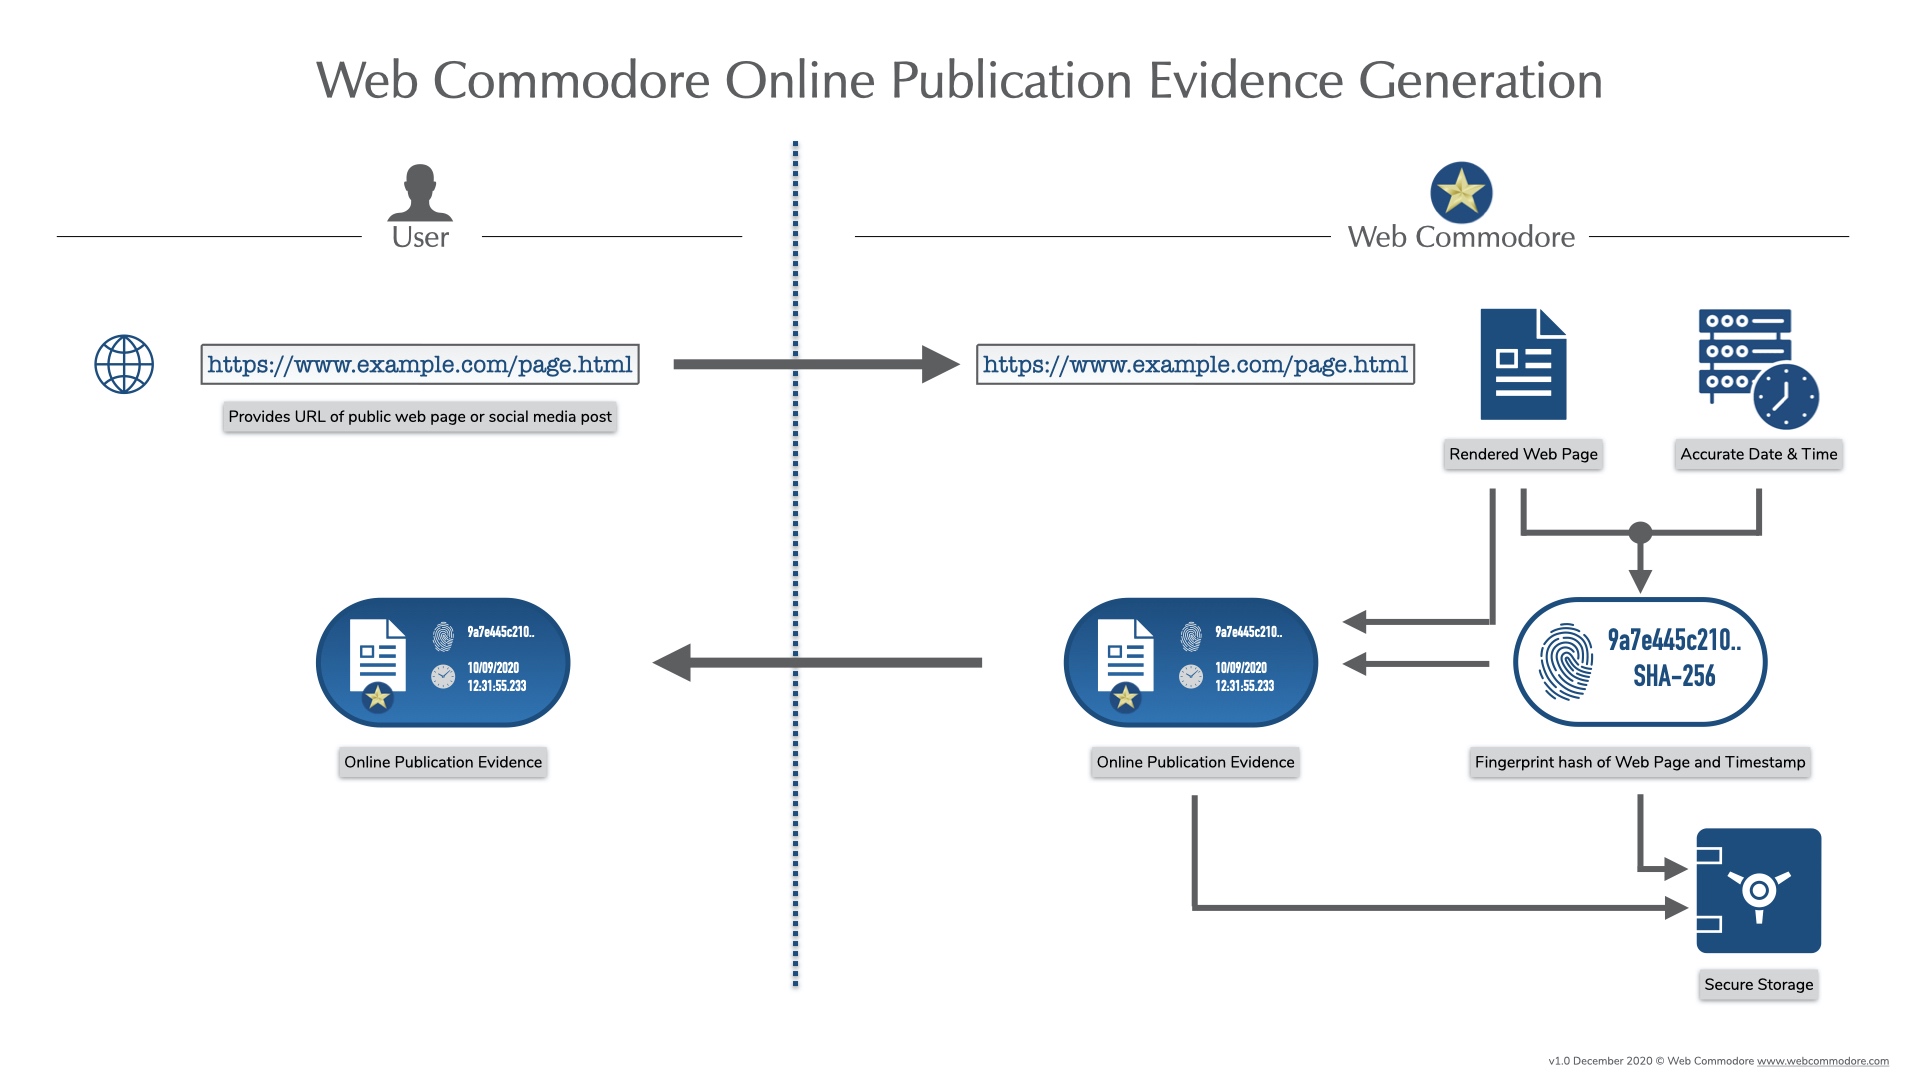 How it works: Web Commodore Online Publication Evidence Generation